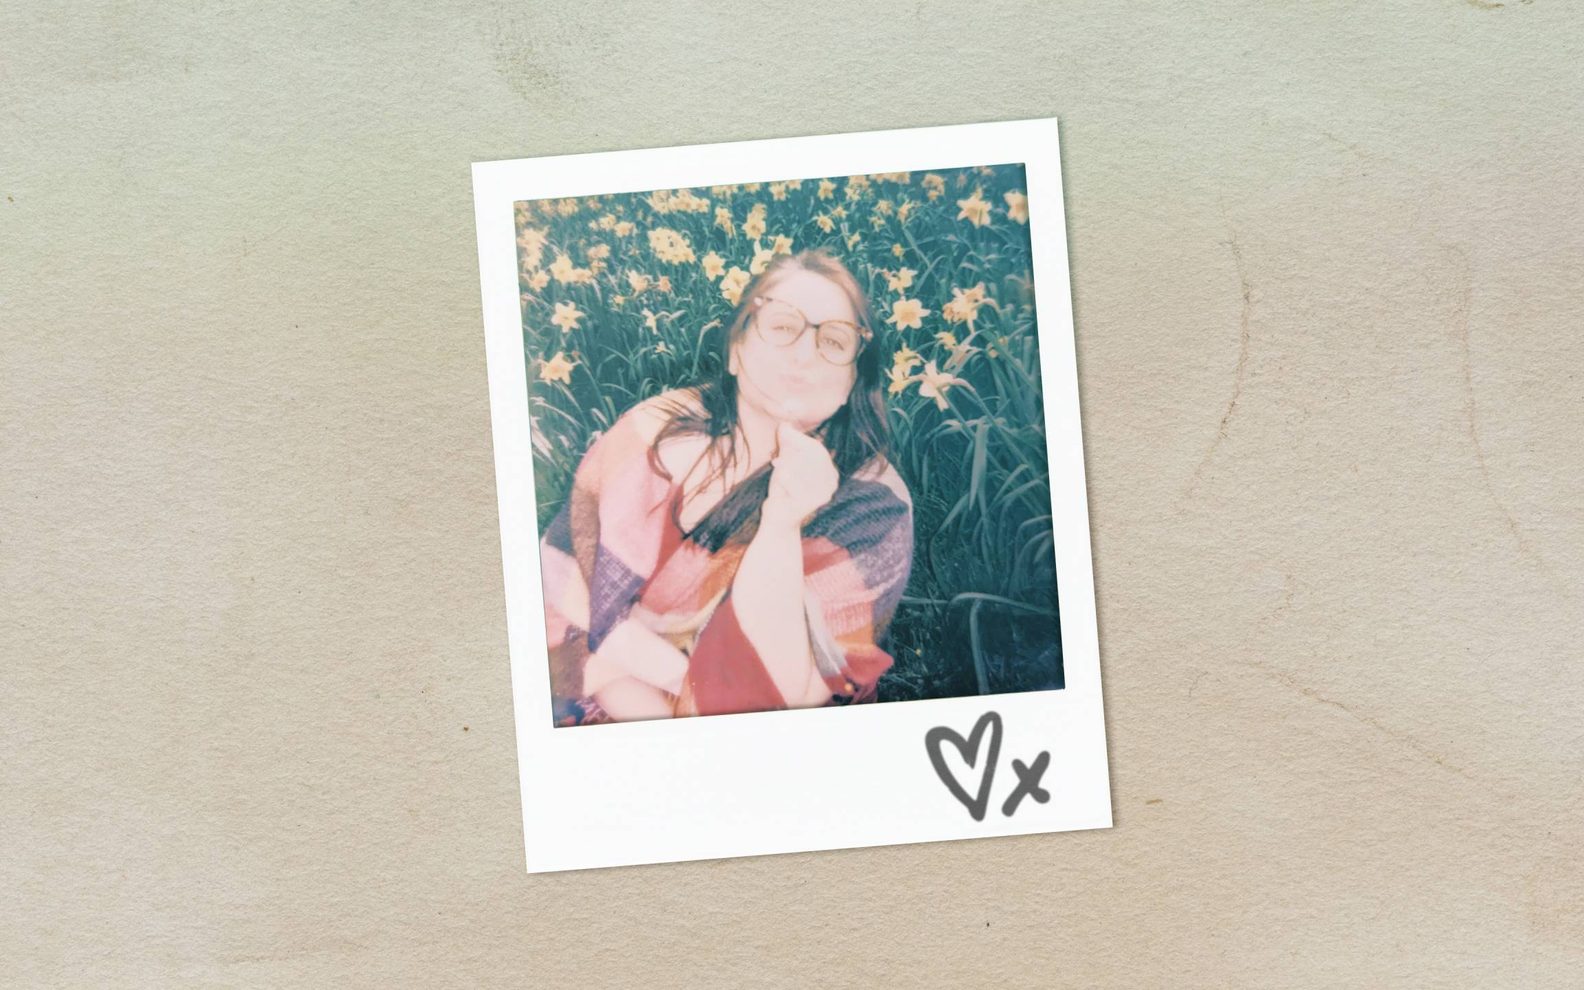 A faded polaroid picture of a young woman in glasses sitting in a field of flowers. A heart and 